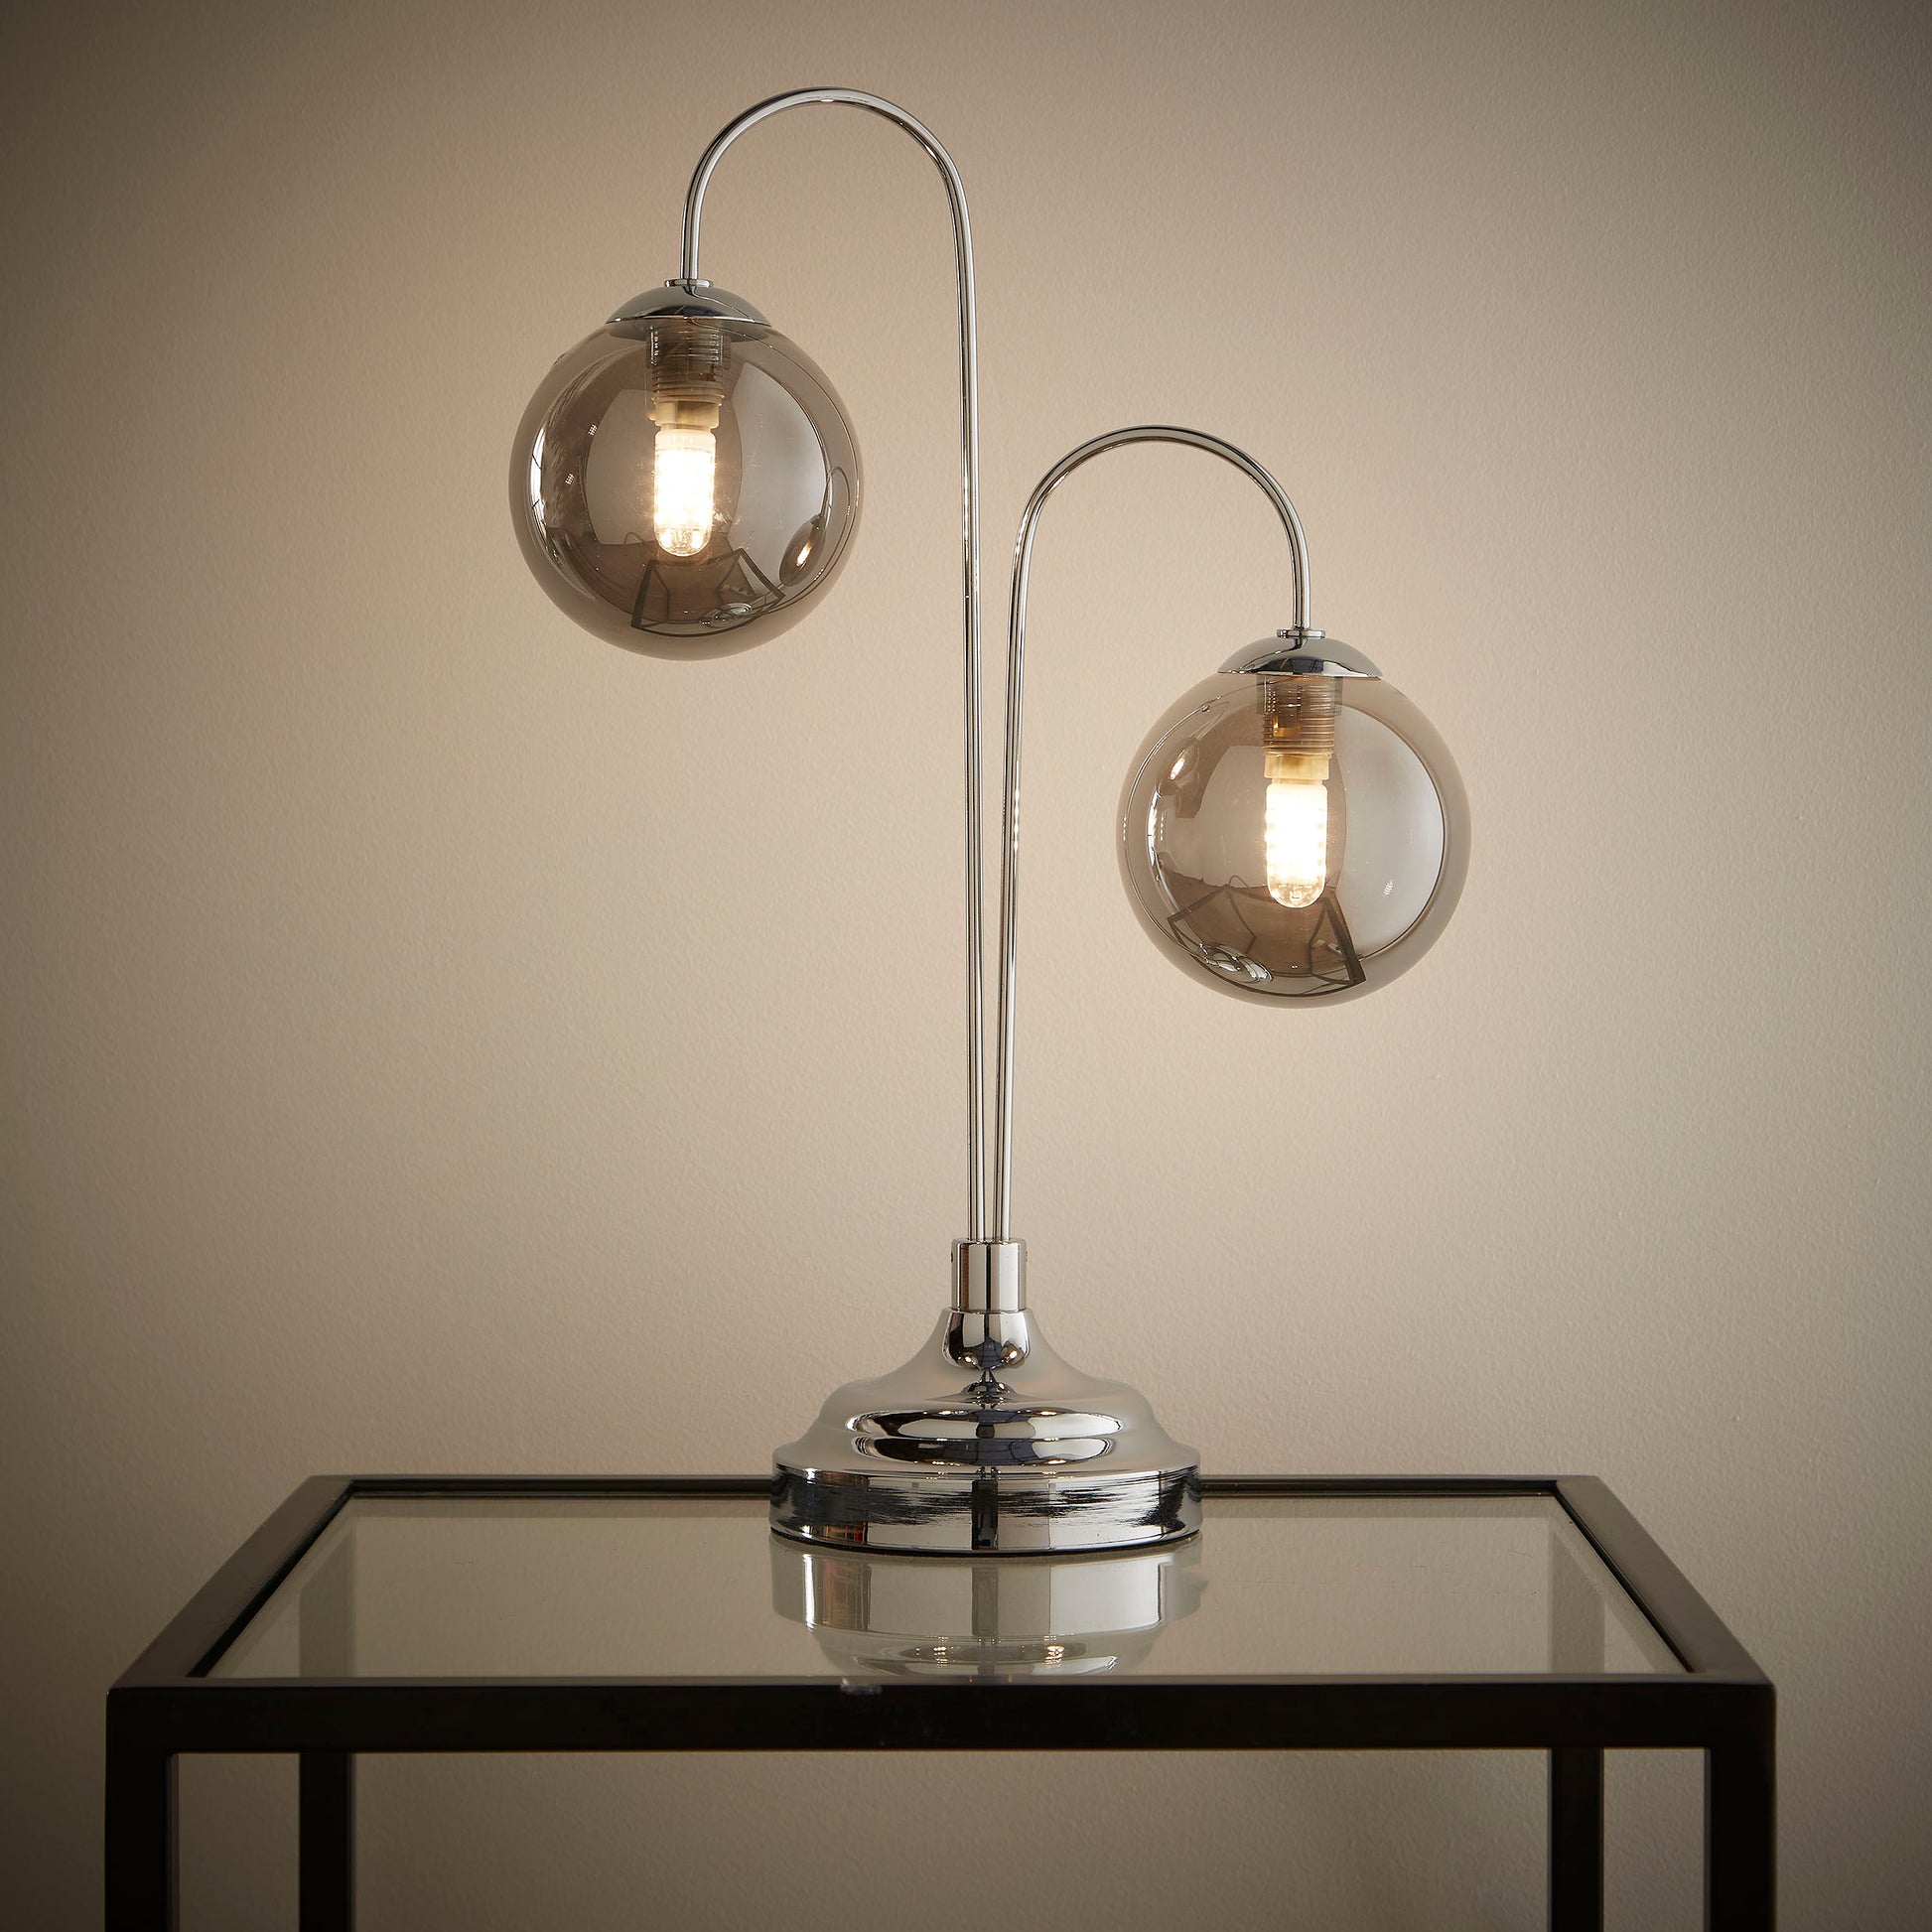 Antique Brass or Chrome Table or Floor lamps with Glass Globe Shades in a hanging branch style